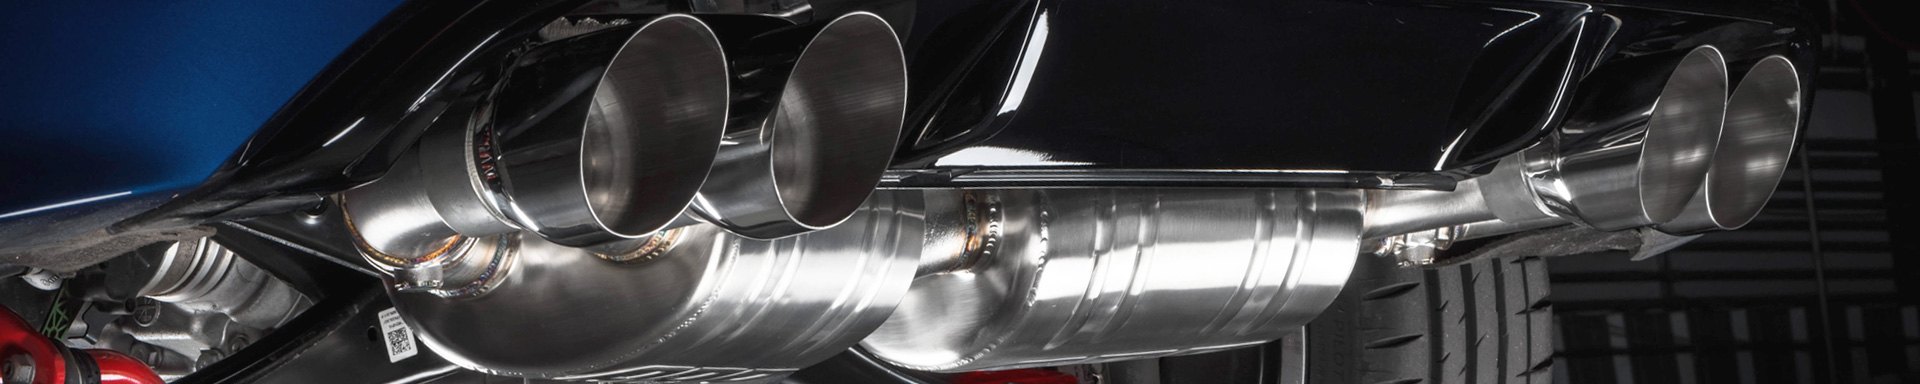 Performance Full Exhaust Systems